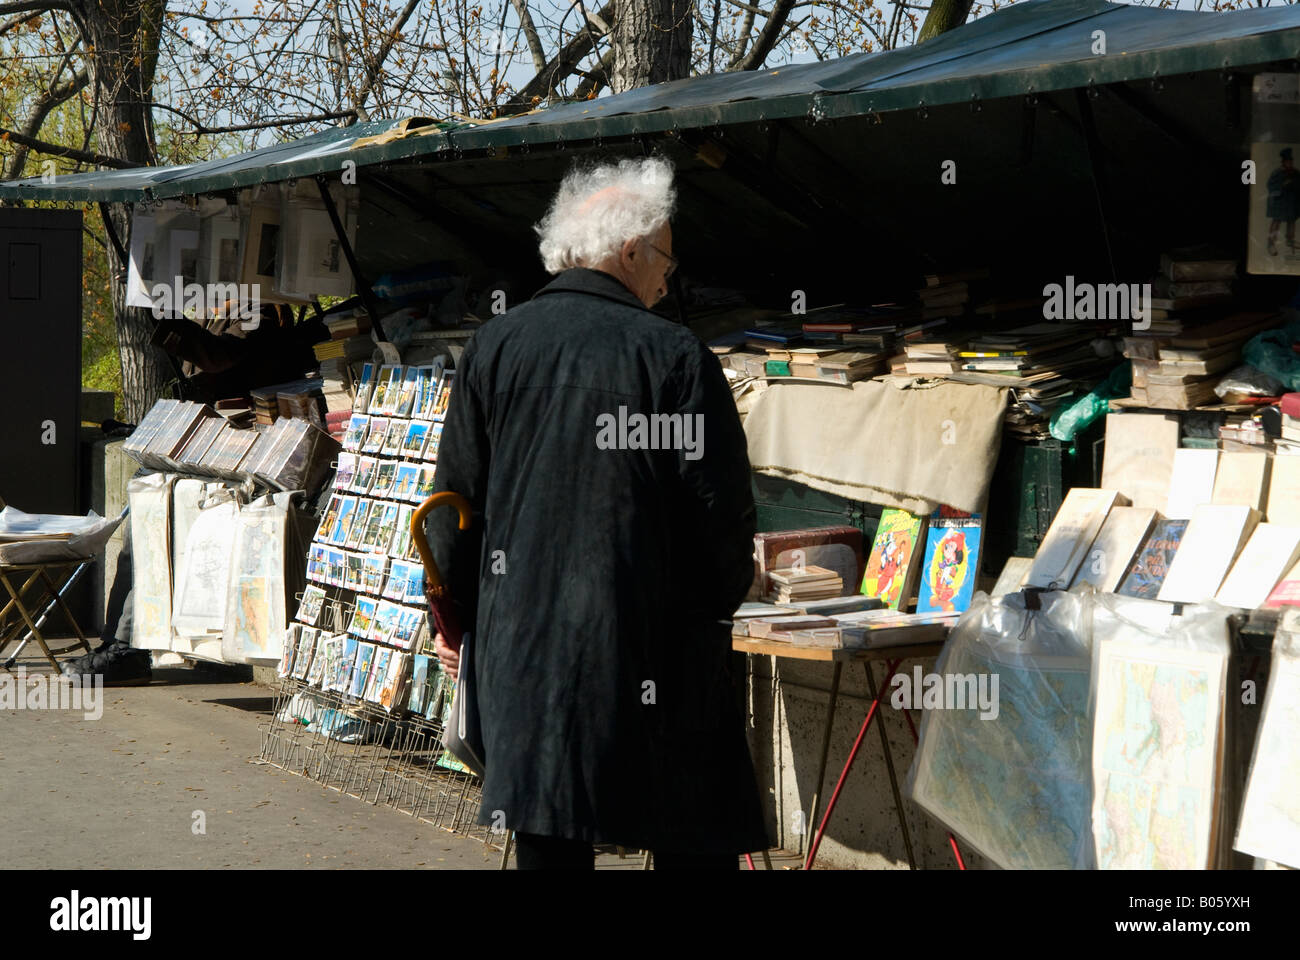 A man browsing books at book vendors along the Seine in Paris, France Stock Photo